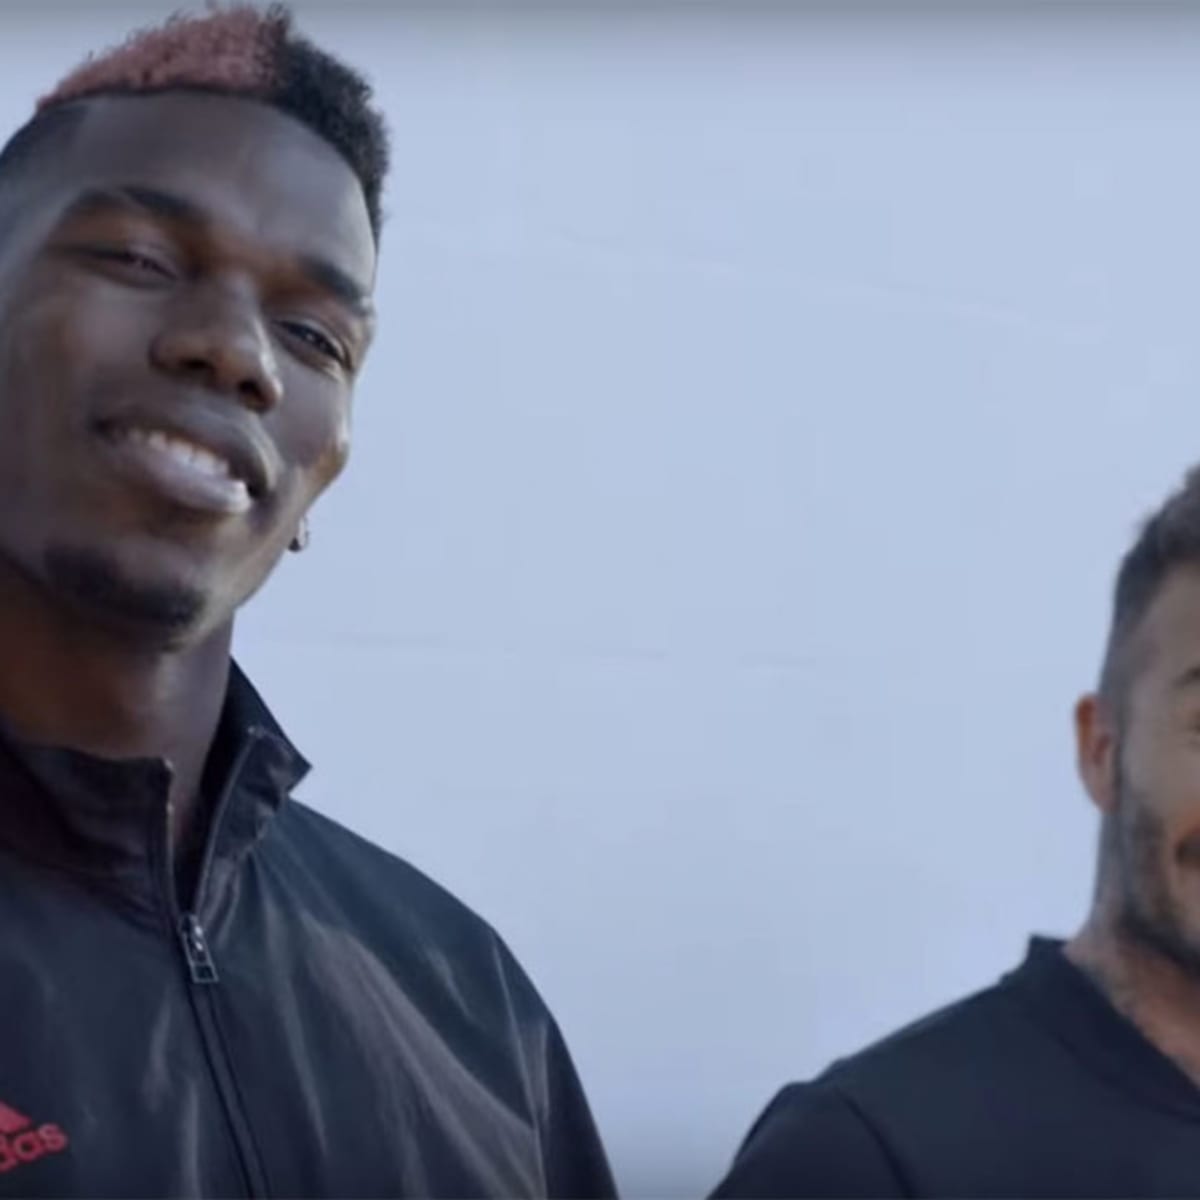 Adidas World Cup video: Features Messi, Pogba, Salah - Sports Illustrated